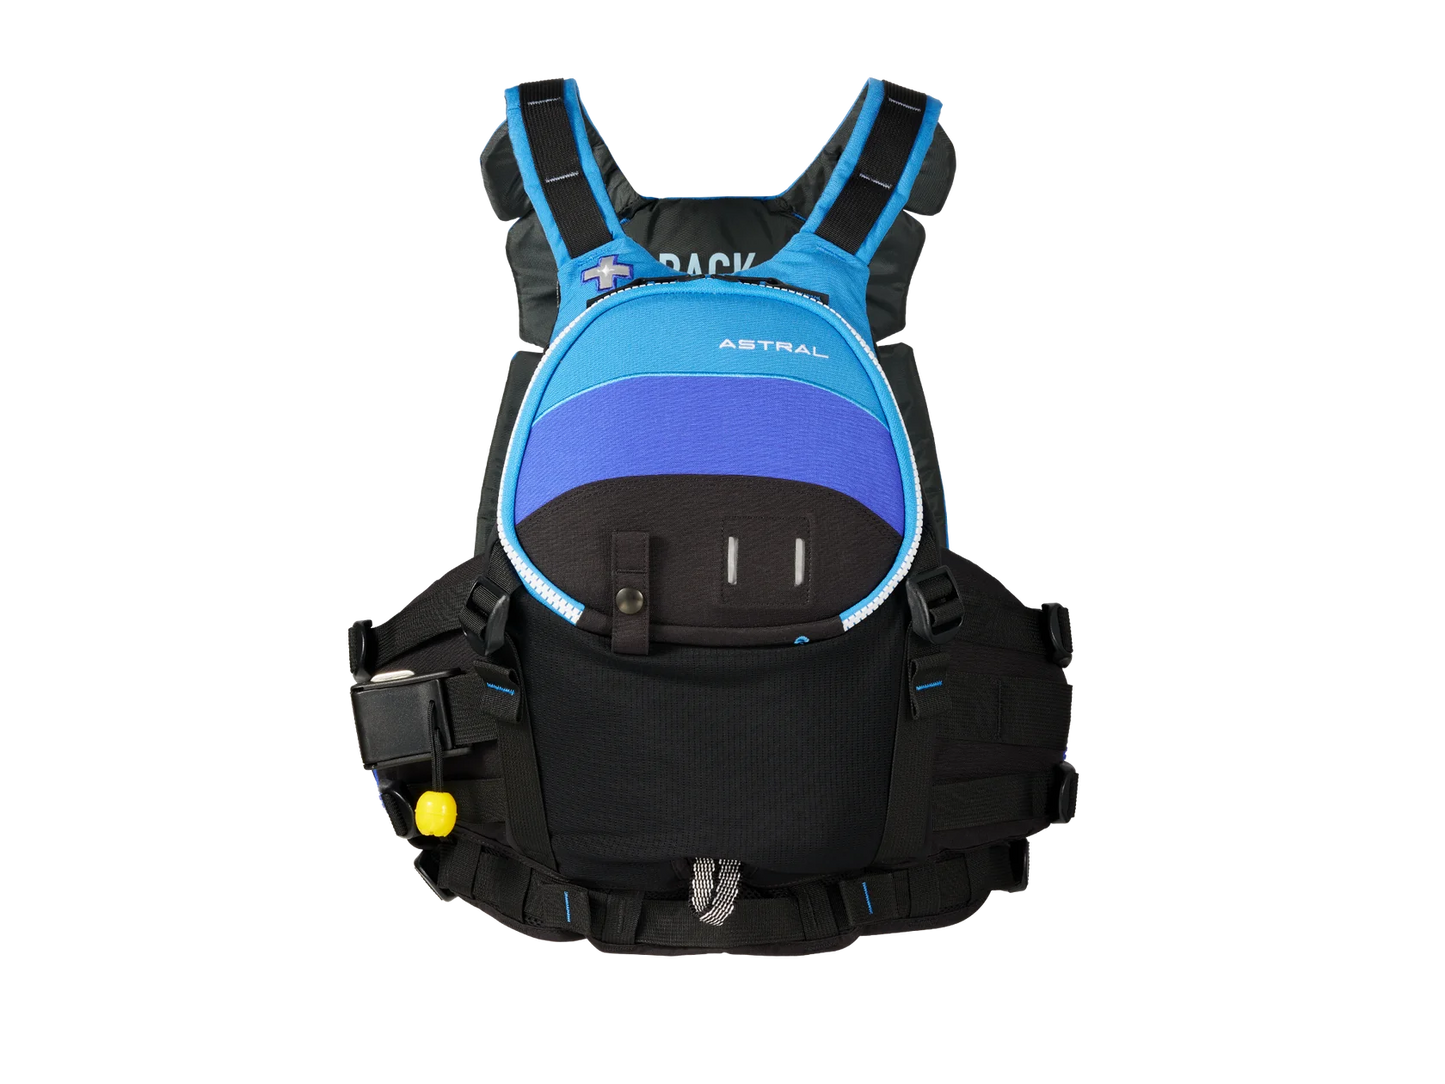 a blue and black Greenjacket Rescue PFD by Astral.